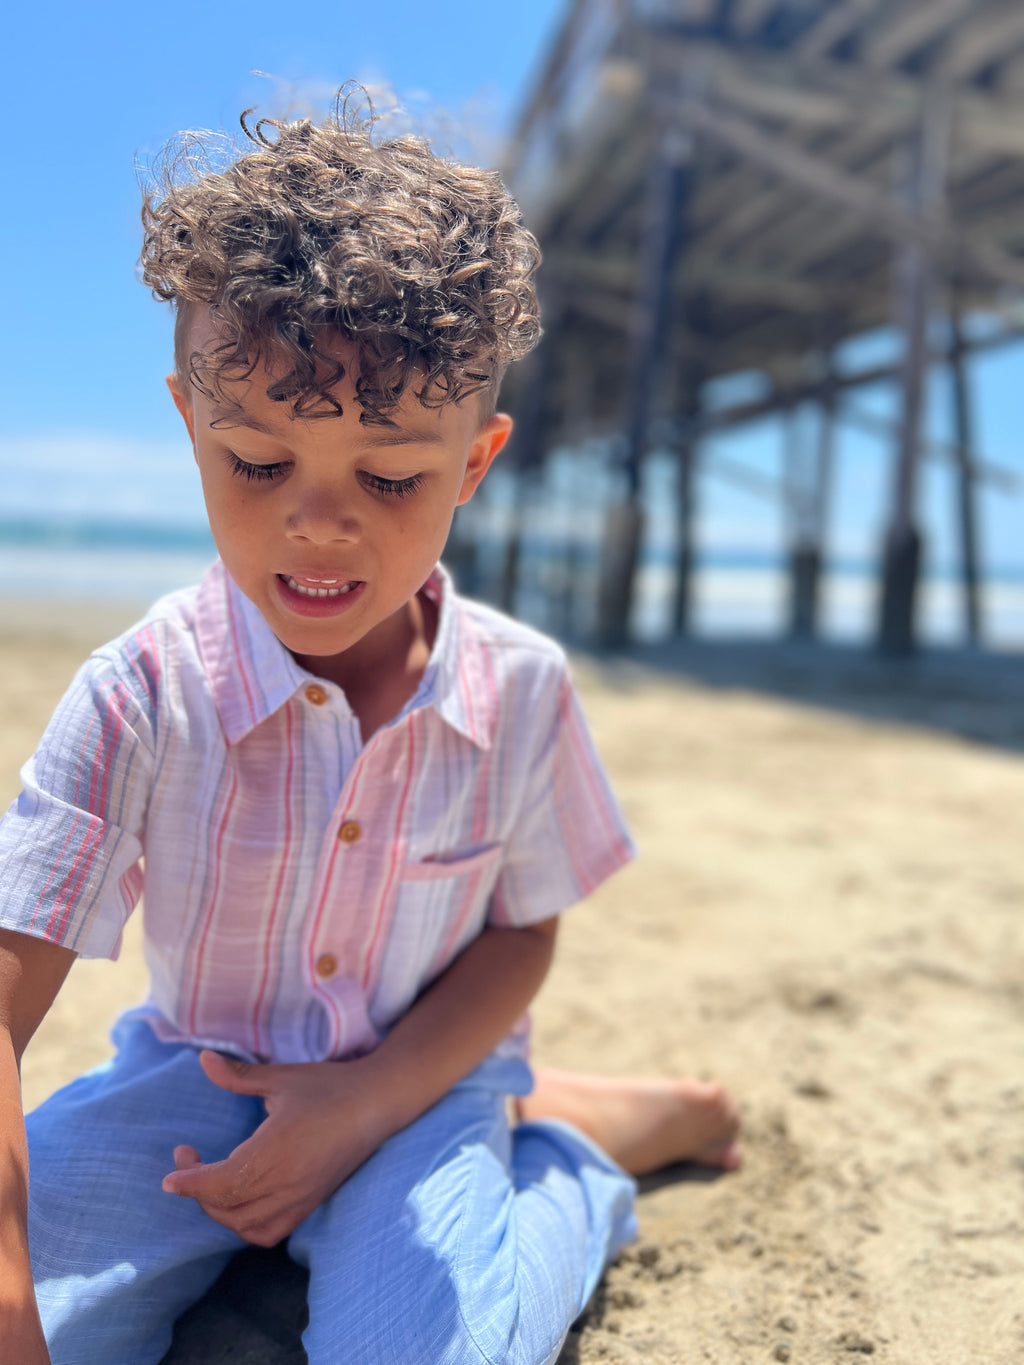 Small boy with curly brown hair, wearing our red/white/blue stripe woven shirt and blue heather pants sitting on the beach playing in the sand.